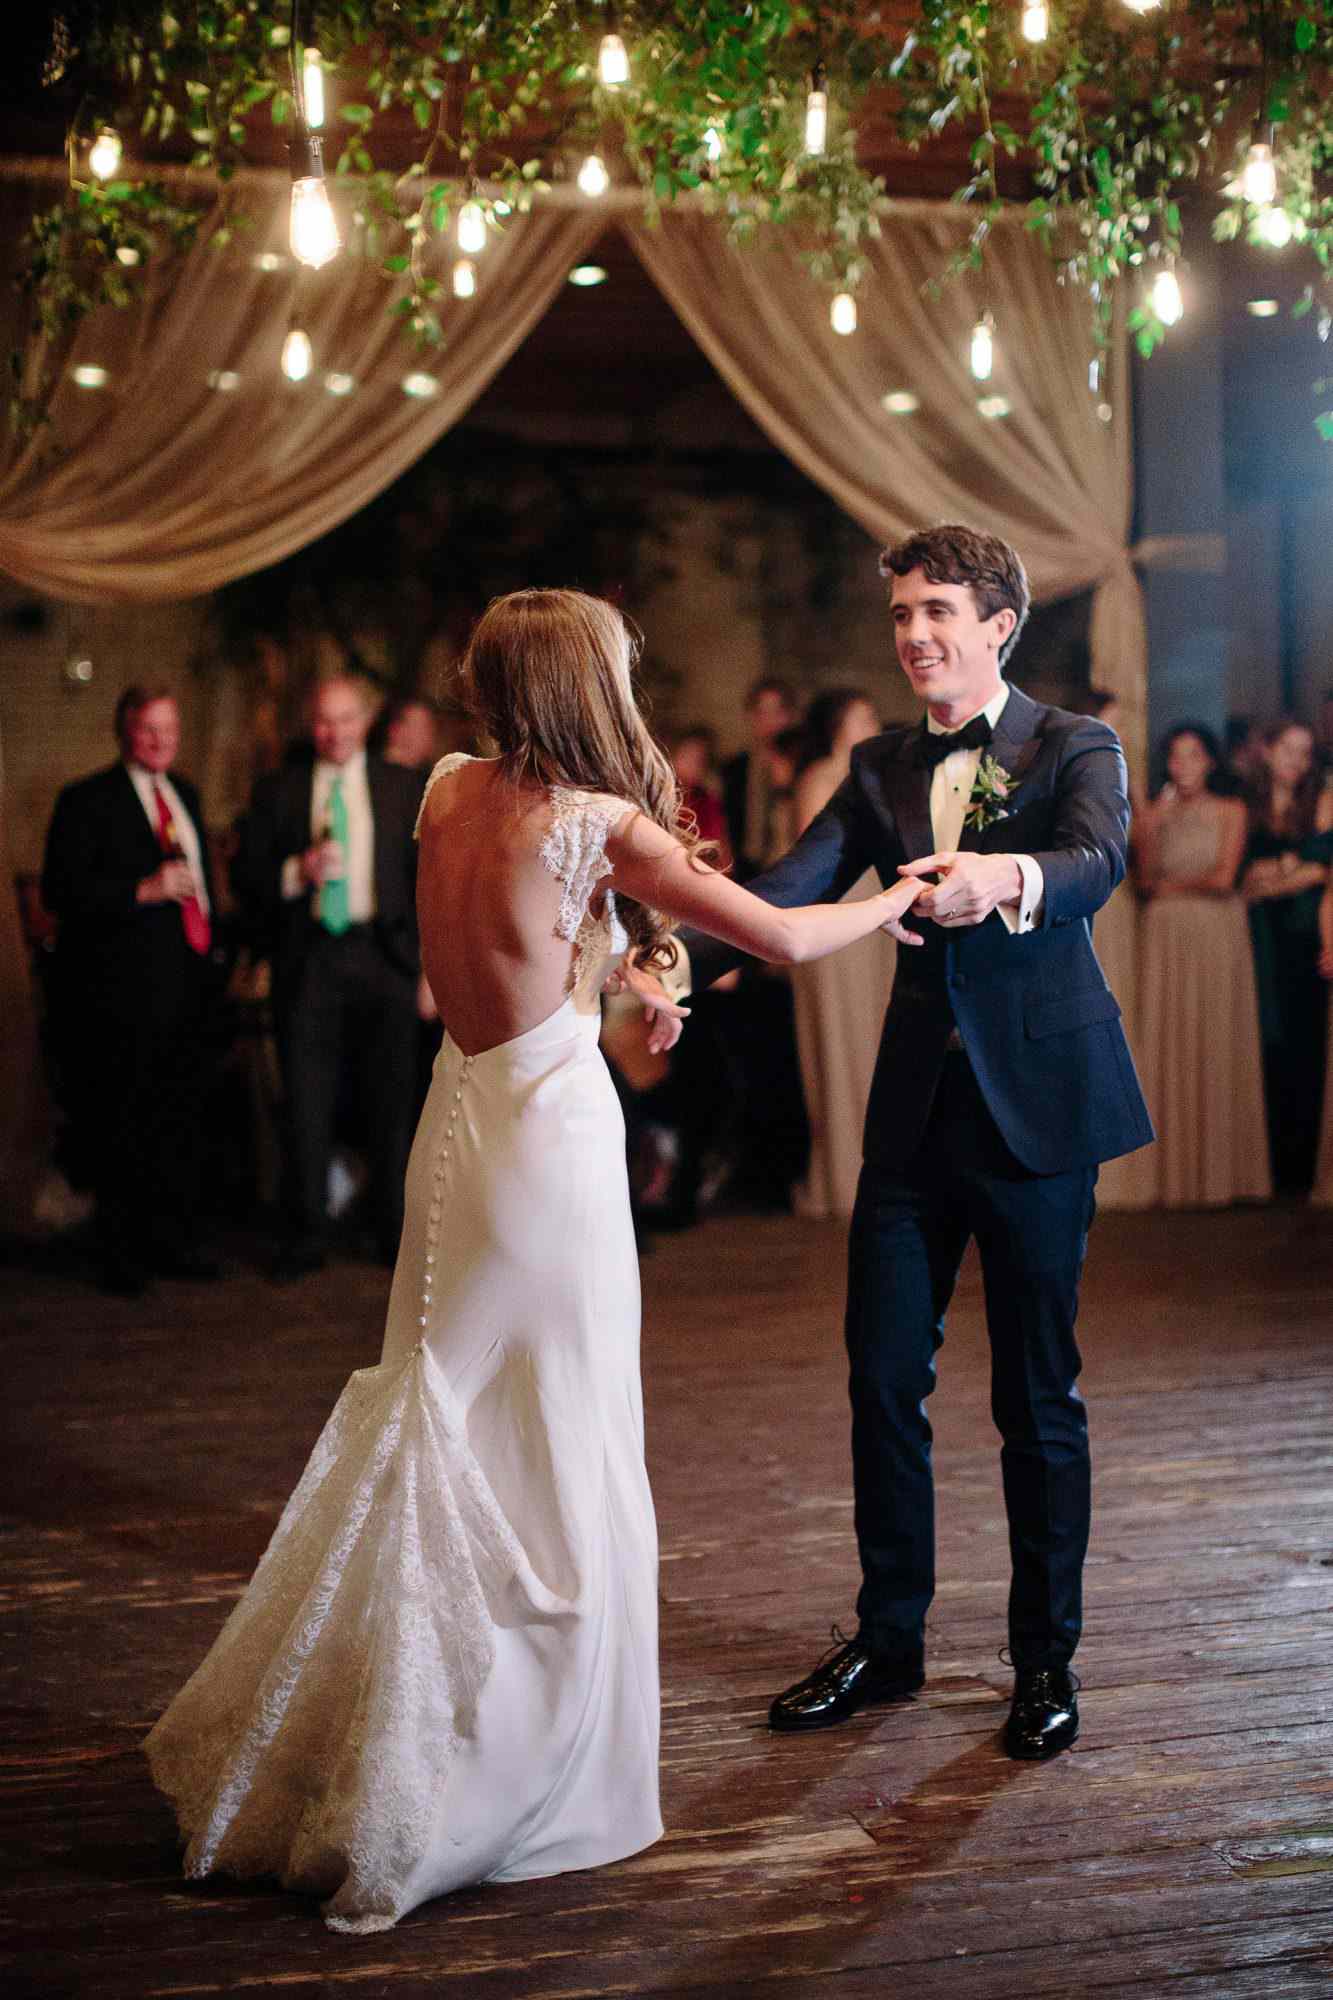 Every Wedding Dance You Should Consider ...